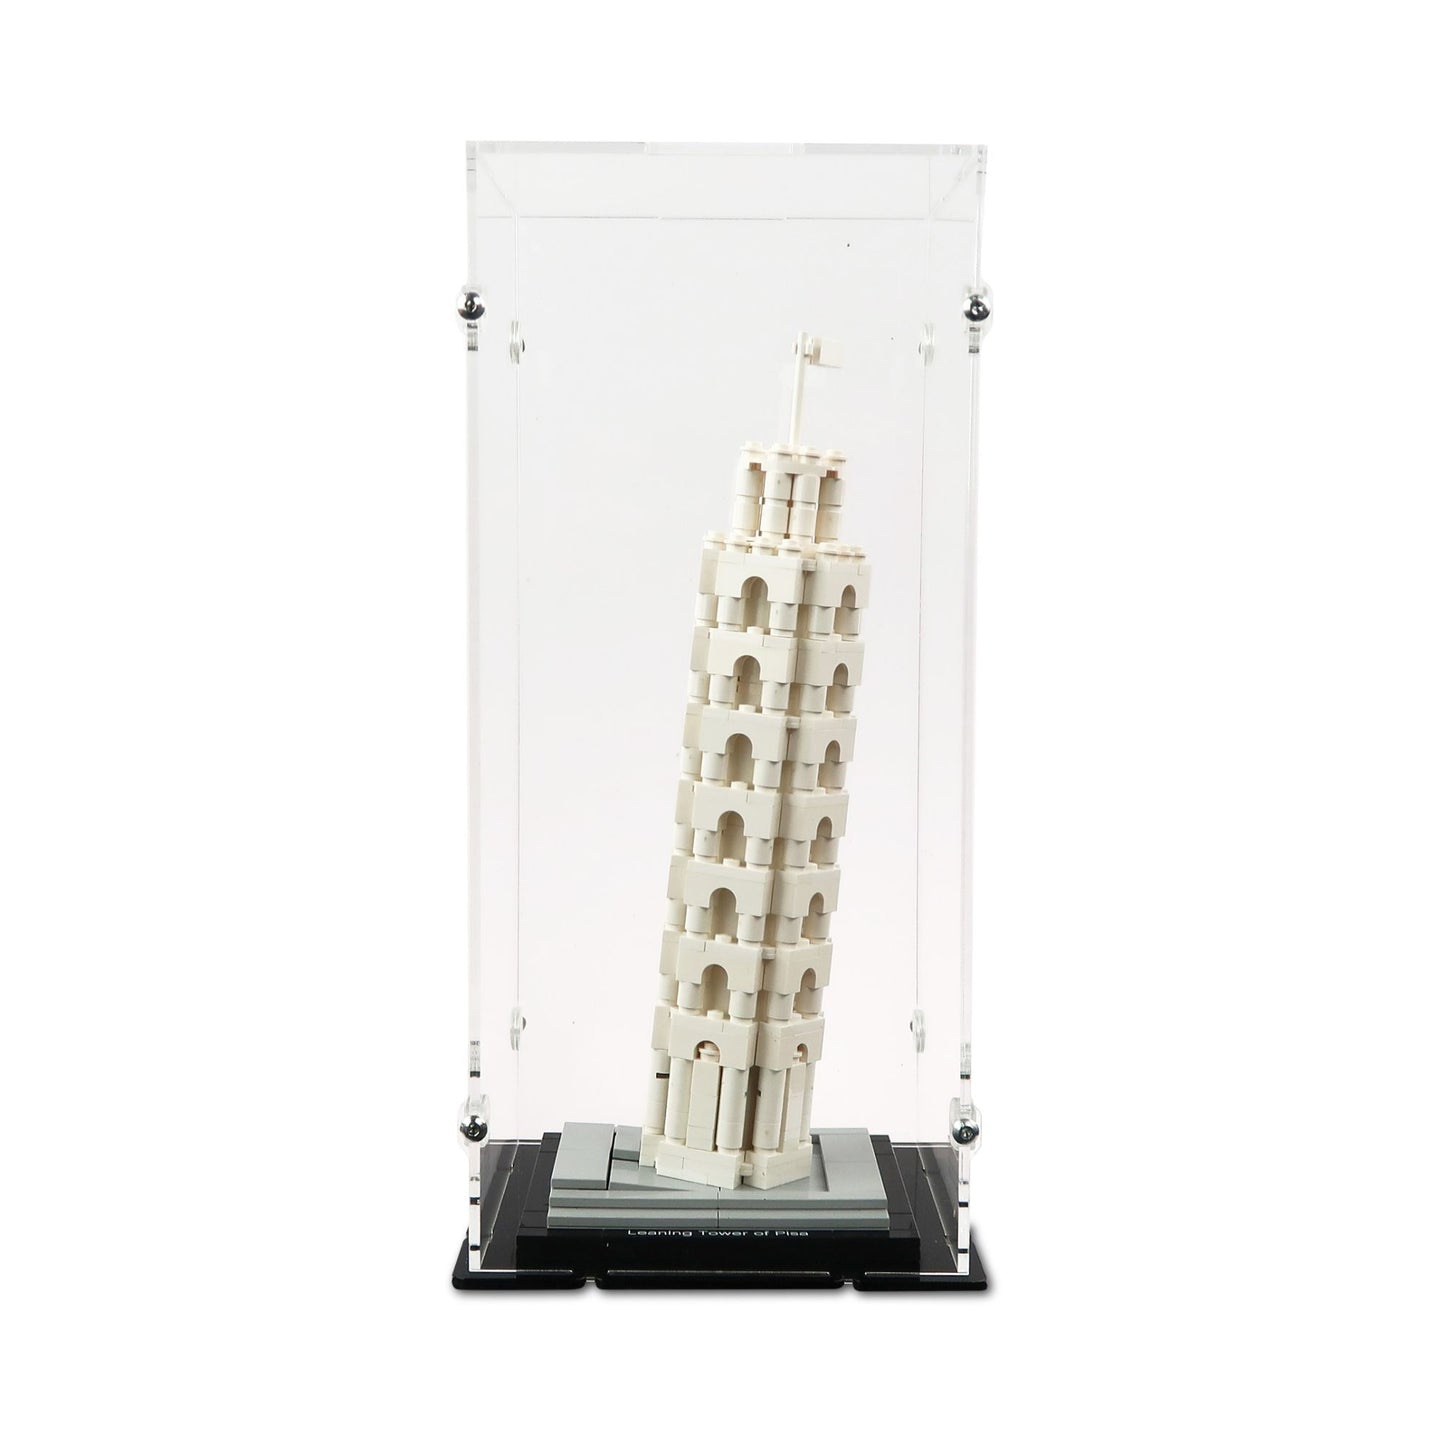 21015 Leaning Tower of Pisa Display Case